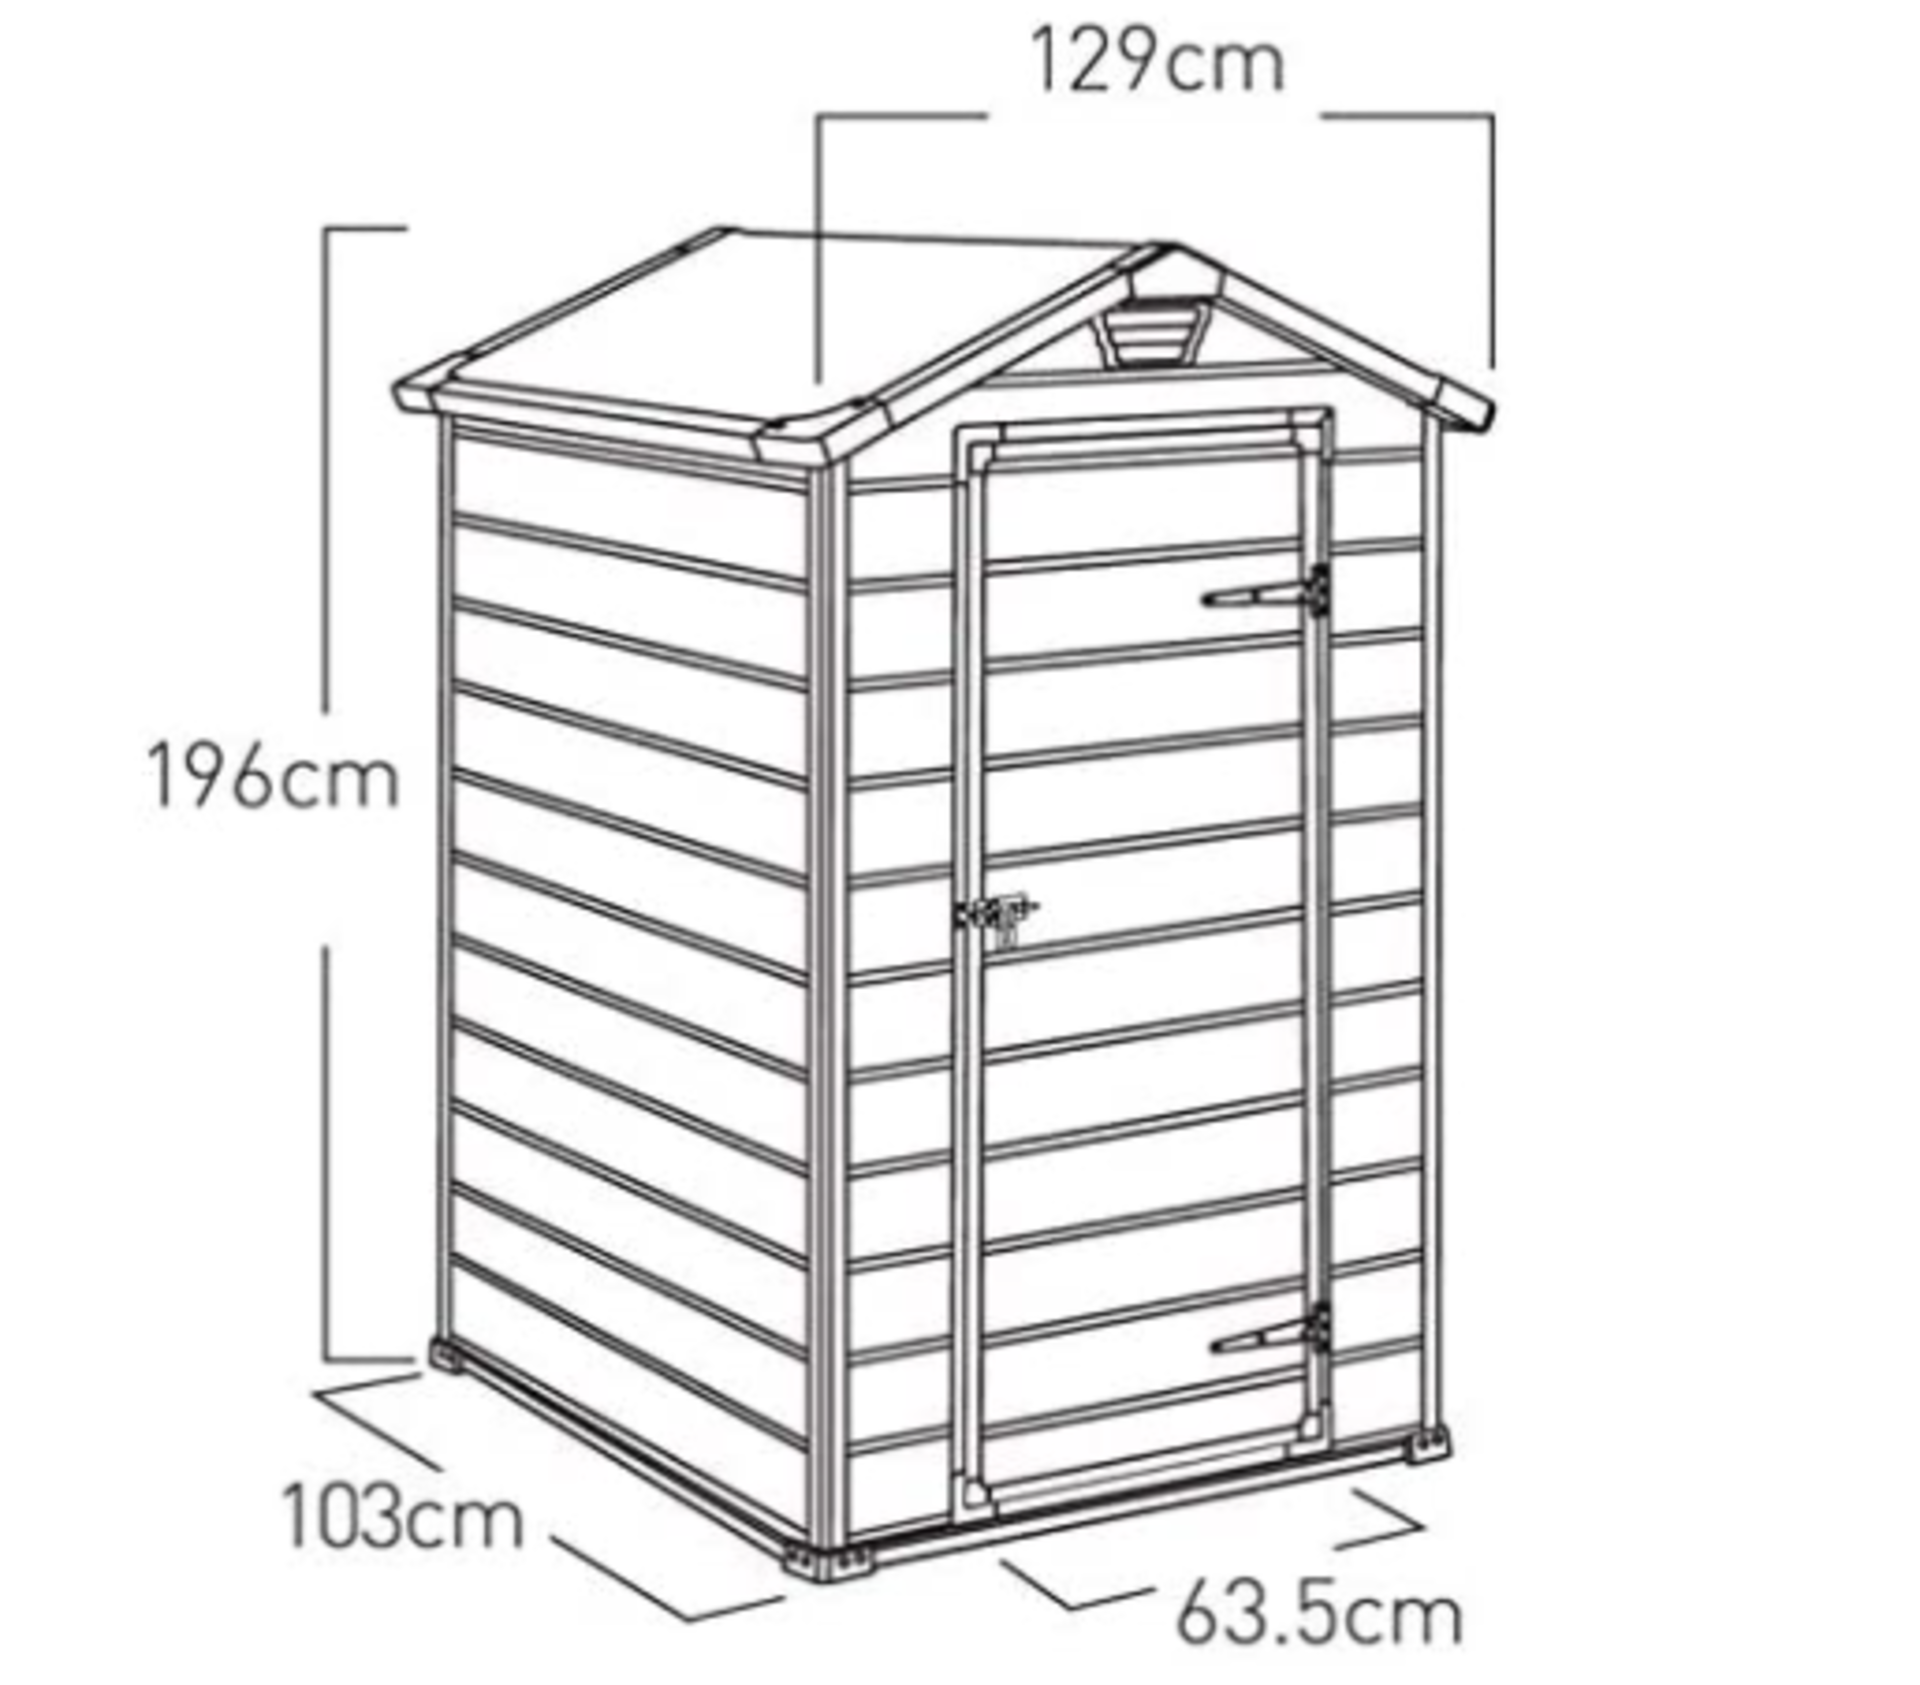 1x Keter Manor Outdoor Plastic Garden Storage Shed 4x3 Grey RRP £319.95. Dimensions (L103x W129x D - Image 5 of 6